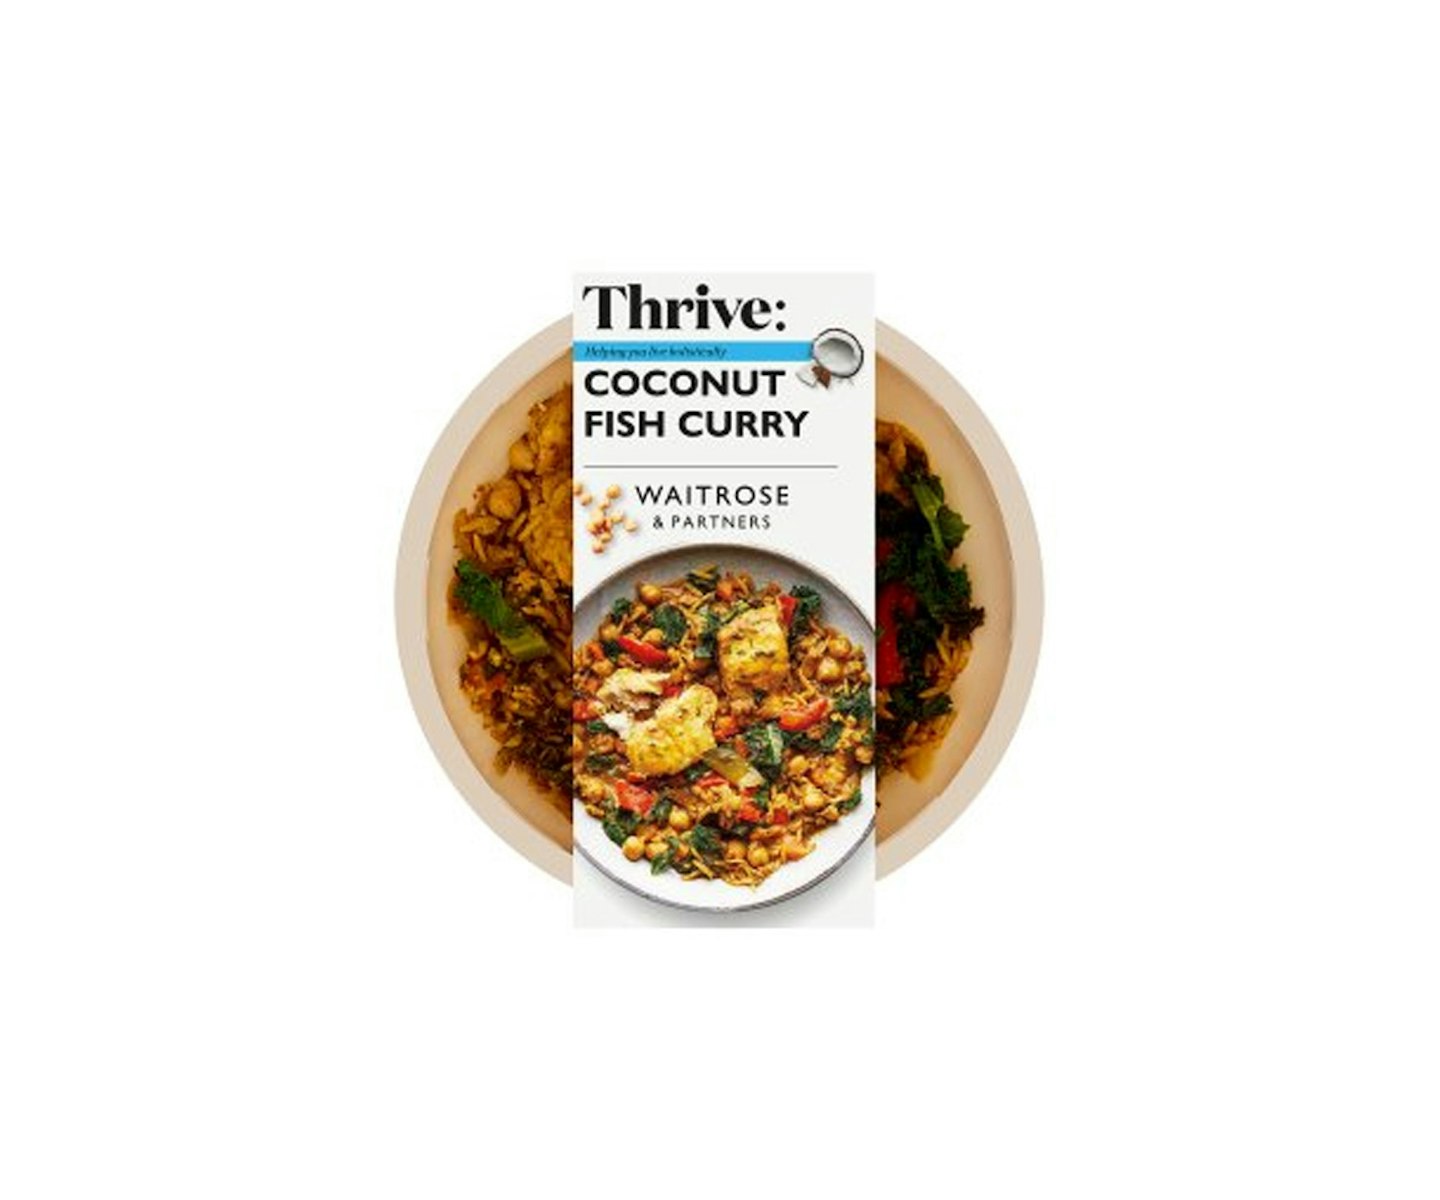 Thrive Coconut Fish Curry